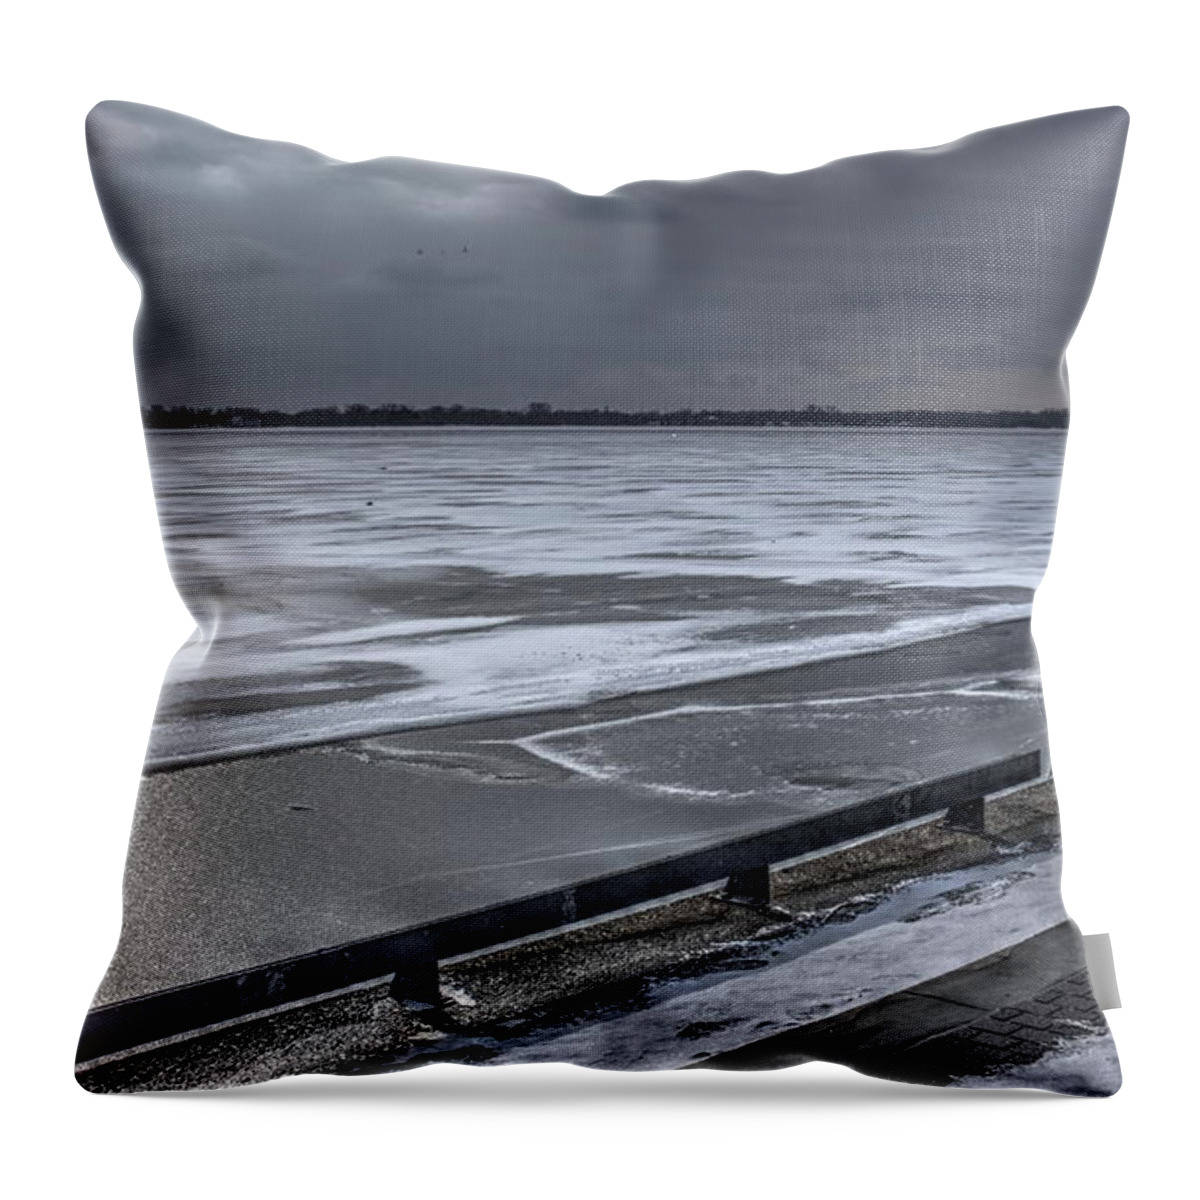 Art Print Throw Pillow featuring the photograph Frozen Lake by Nicky Jameson